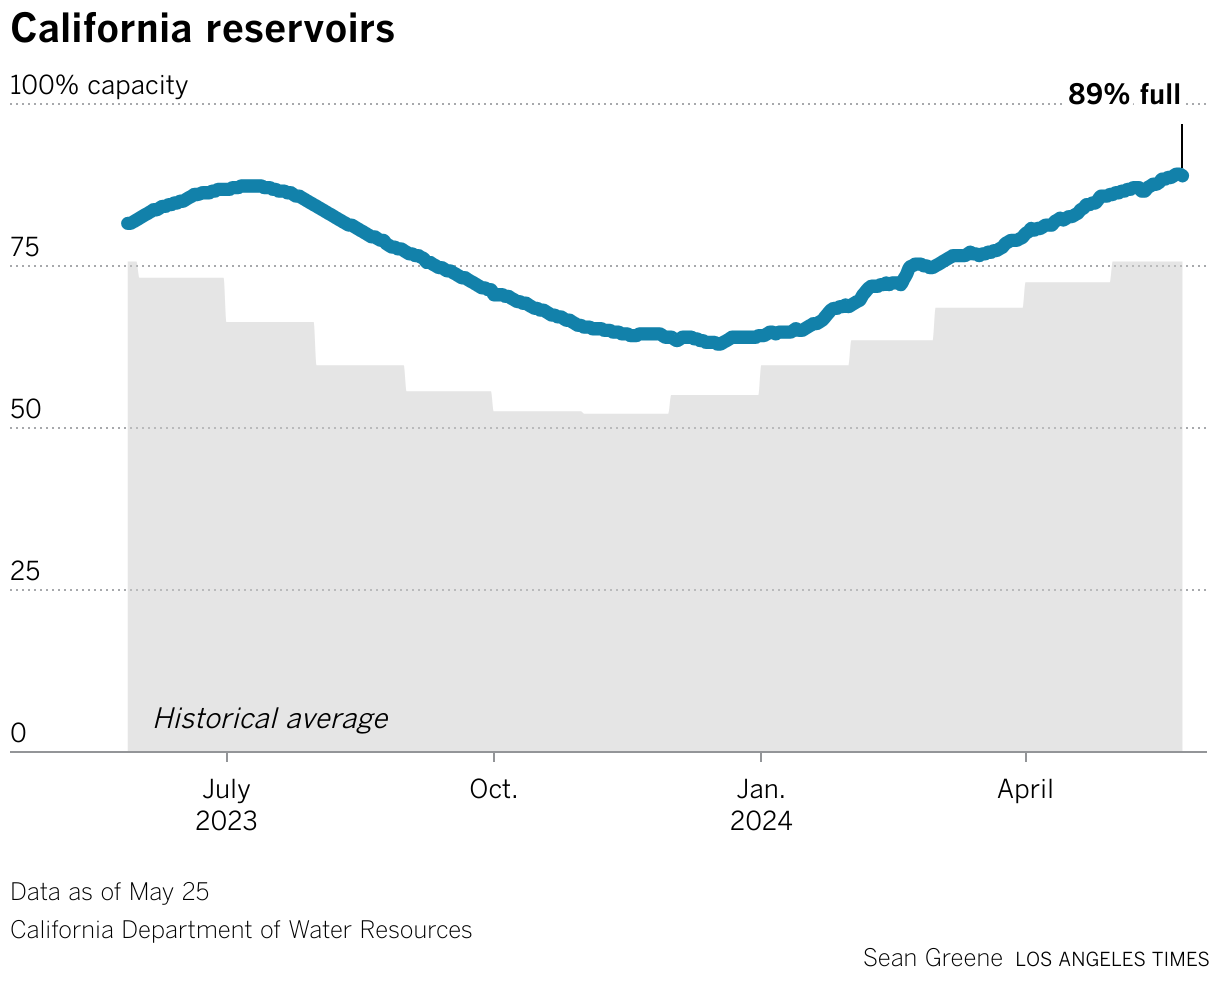 California reservoirs's storage capacity is 115% of average for this month.